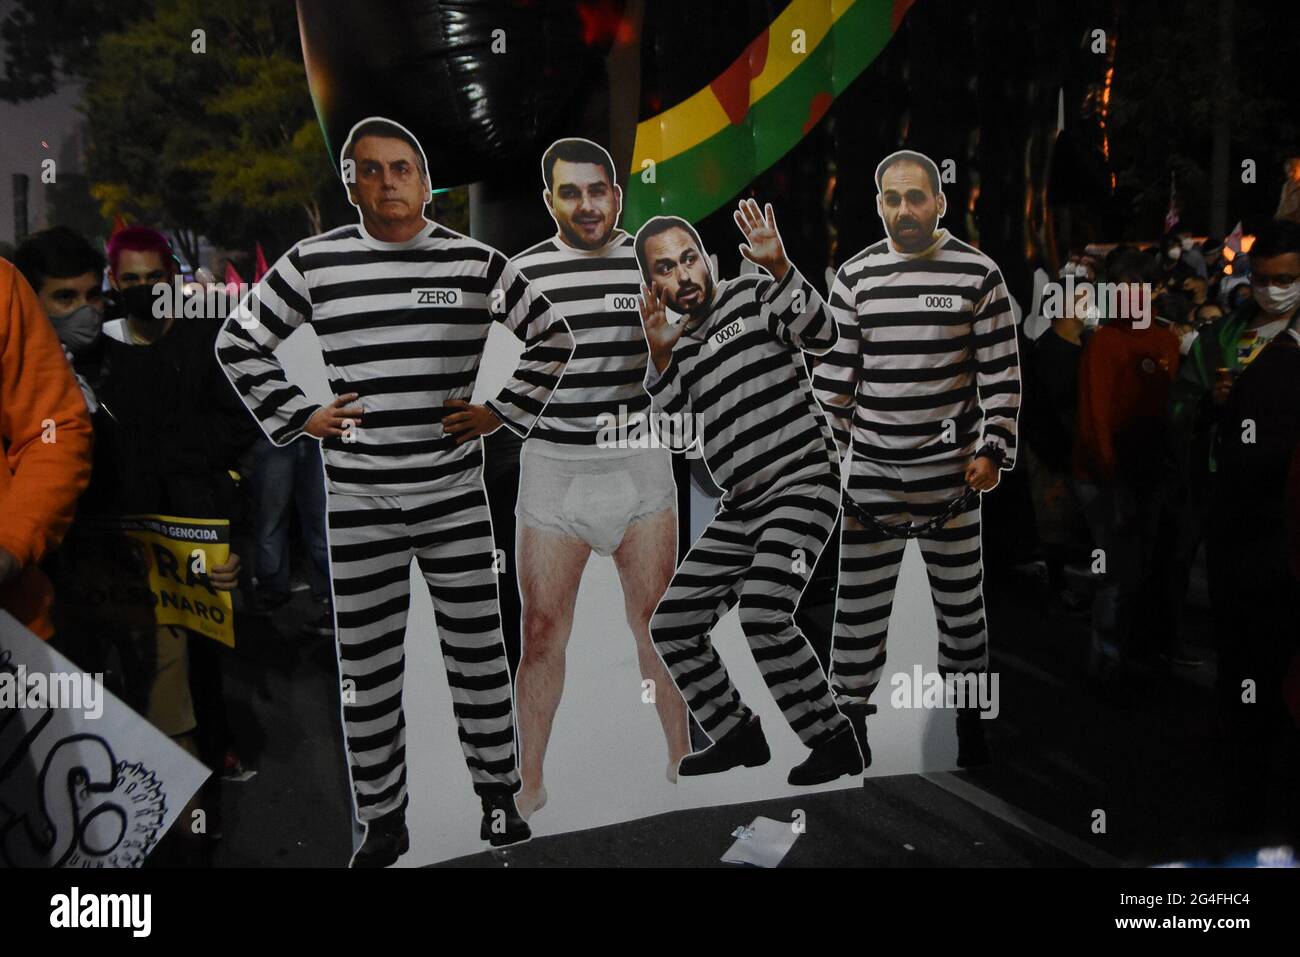 Protesters against Bolsonaro and in favor of the vaccine in Brazil that killed 500,000 people. Demonstrators are seen with flags, singing, and with slogans against the current government. (Photo by Ronaldo Silva/Pacific Press/Sipa USA) Credit: Sipa USA/Alamy Live News Stock Photo